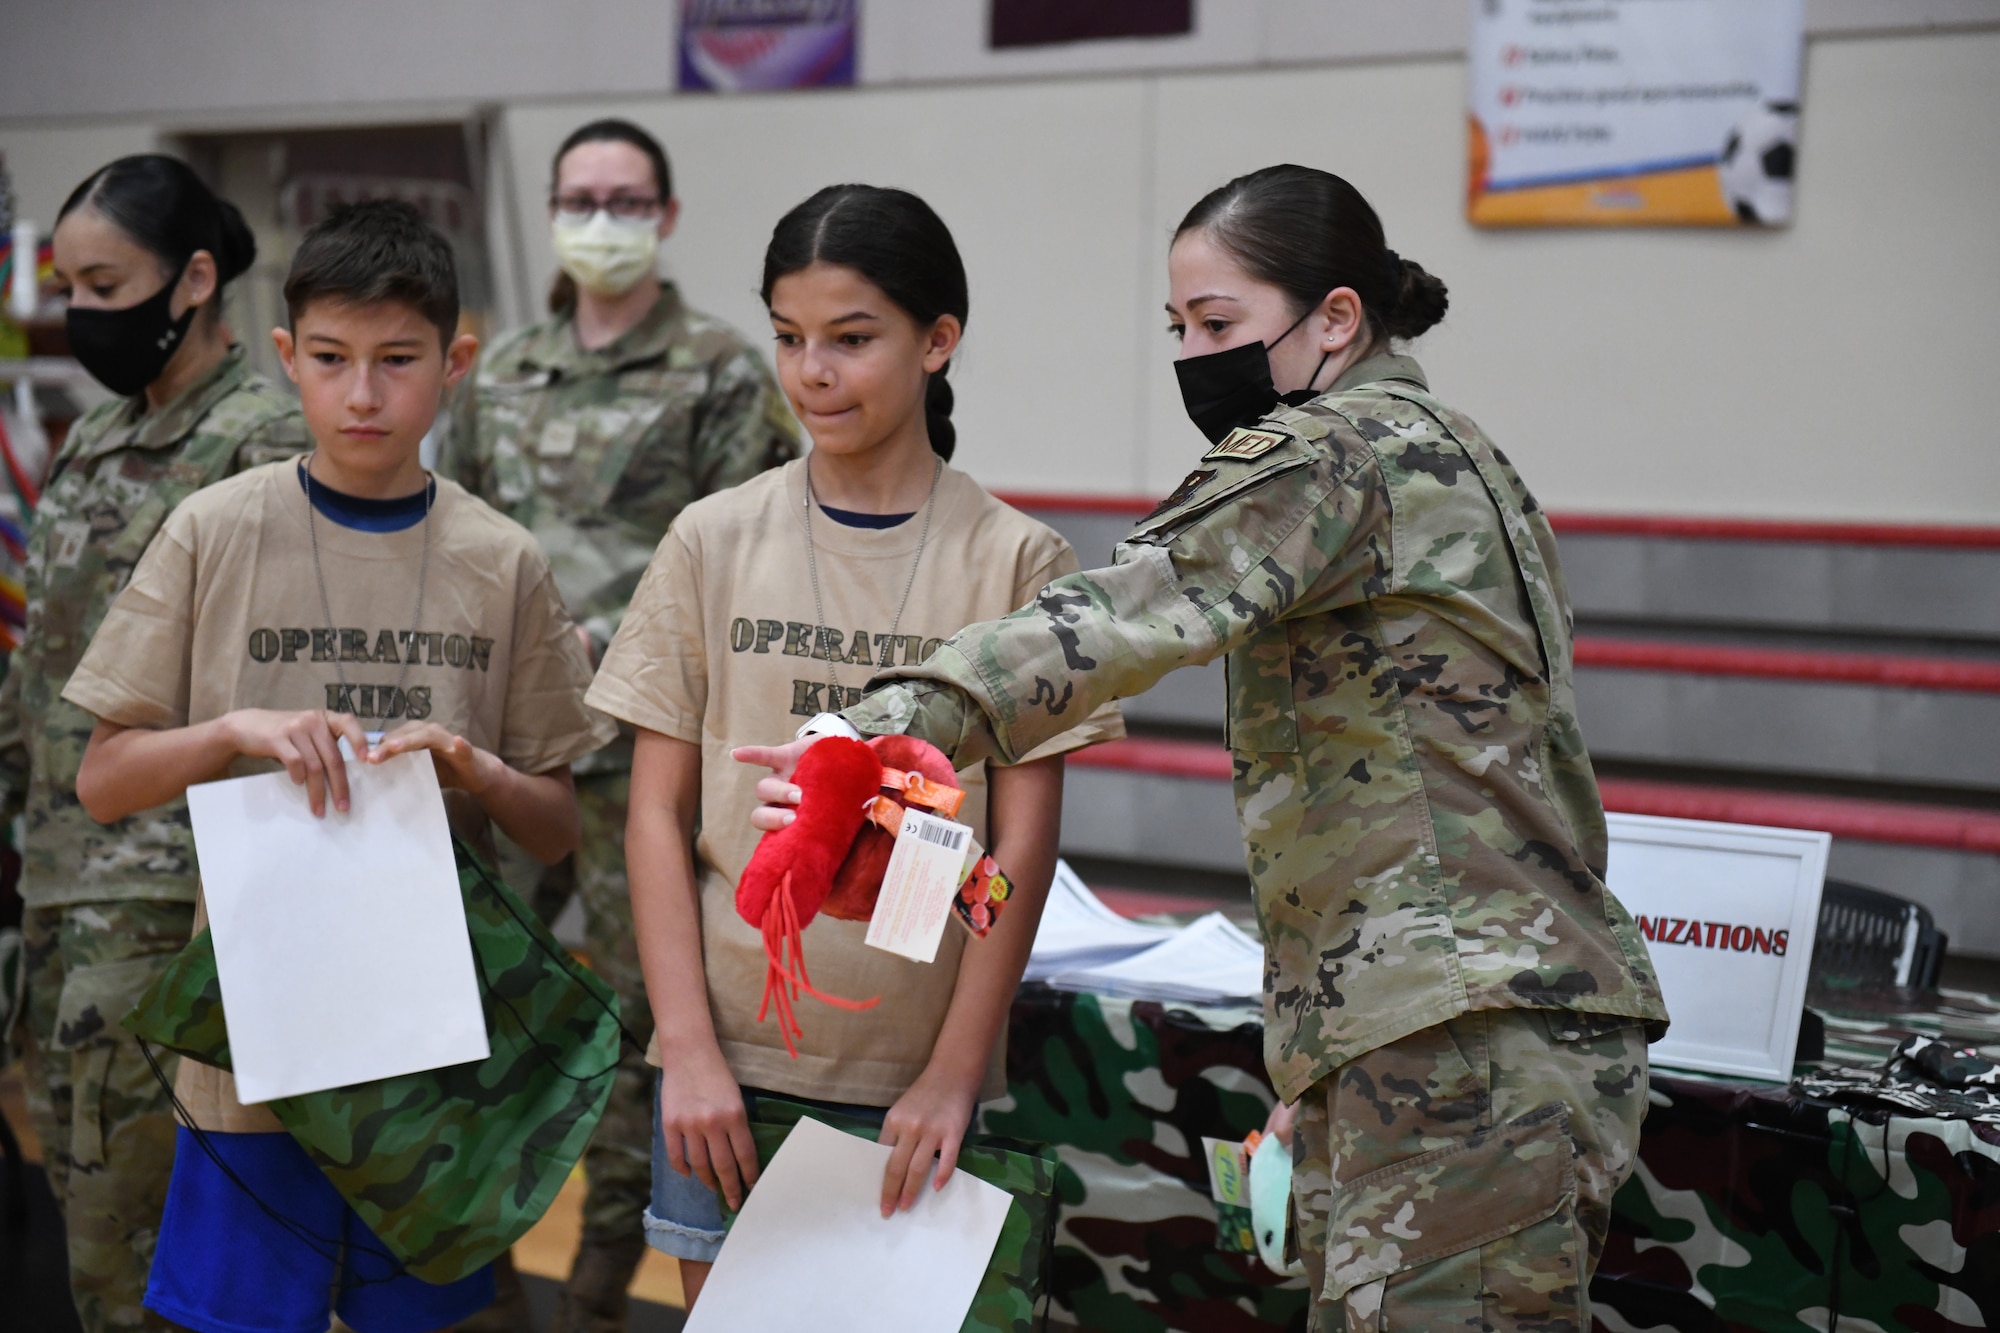 U.S. Air Force Senior Airman Gabriella Zuniga, 56th Medical Group medical technician, explains immunizations and viruses of concern to military children during Operation Kids Investigating Deployment Services Nov. 13, 2021, at Luke Air Force Base, Arizona. Operation K.I.D.S. is an event that included a mock pre-deployment line with visits to finance, medical, the American Red Cross, key spouse and chapel personnel, as an imitation of what their parents experience prior to deploying. The Airman and Family Readiness Center takes care of Airmen and their families by providing educational resources and holding events such as Operation K.I.D.S., which gives children a better understanding of their parents’ sacrifice and dedication, and allows a dialog within families about deployments. (U.S. Air Force photo by Tech. Sgt. Amber Carter)